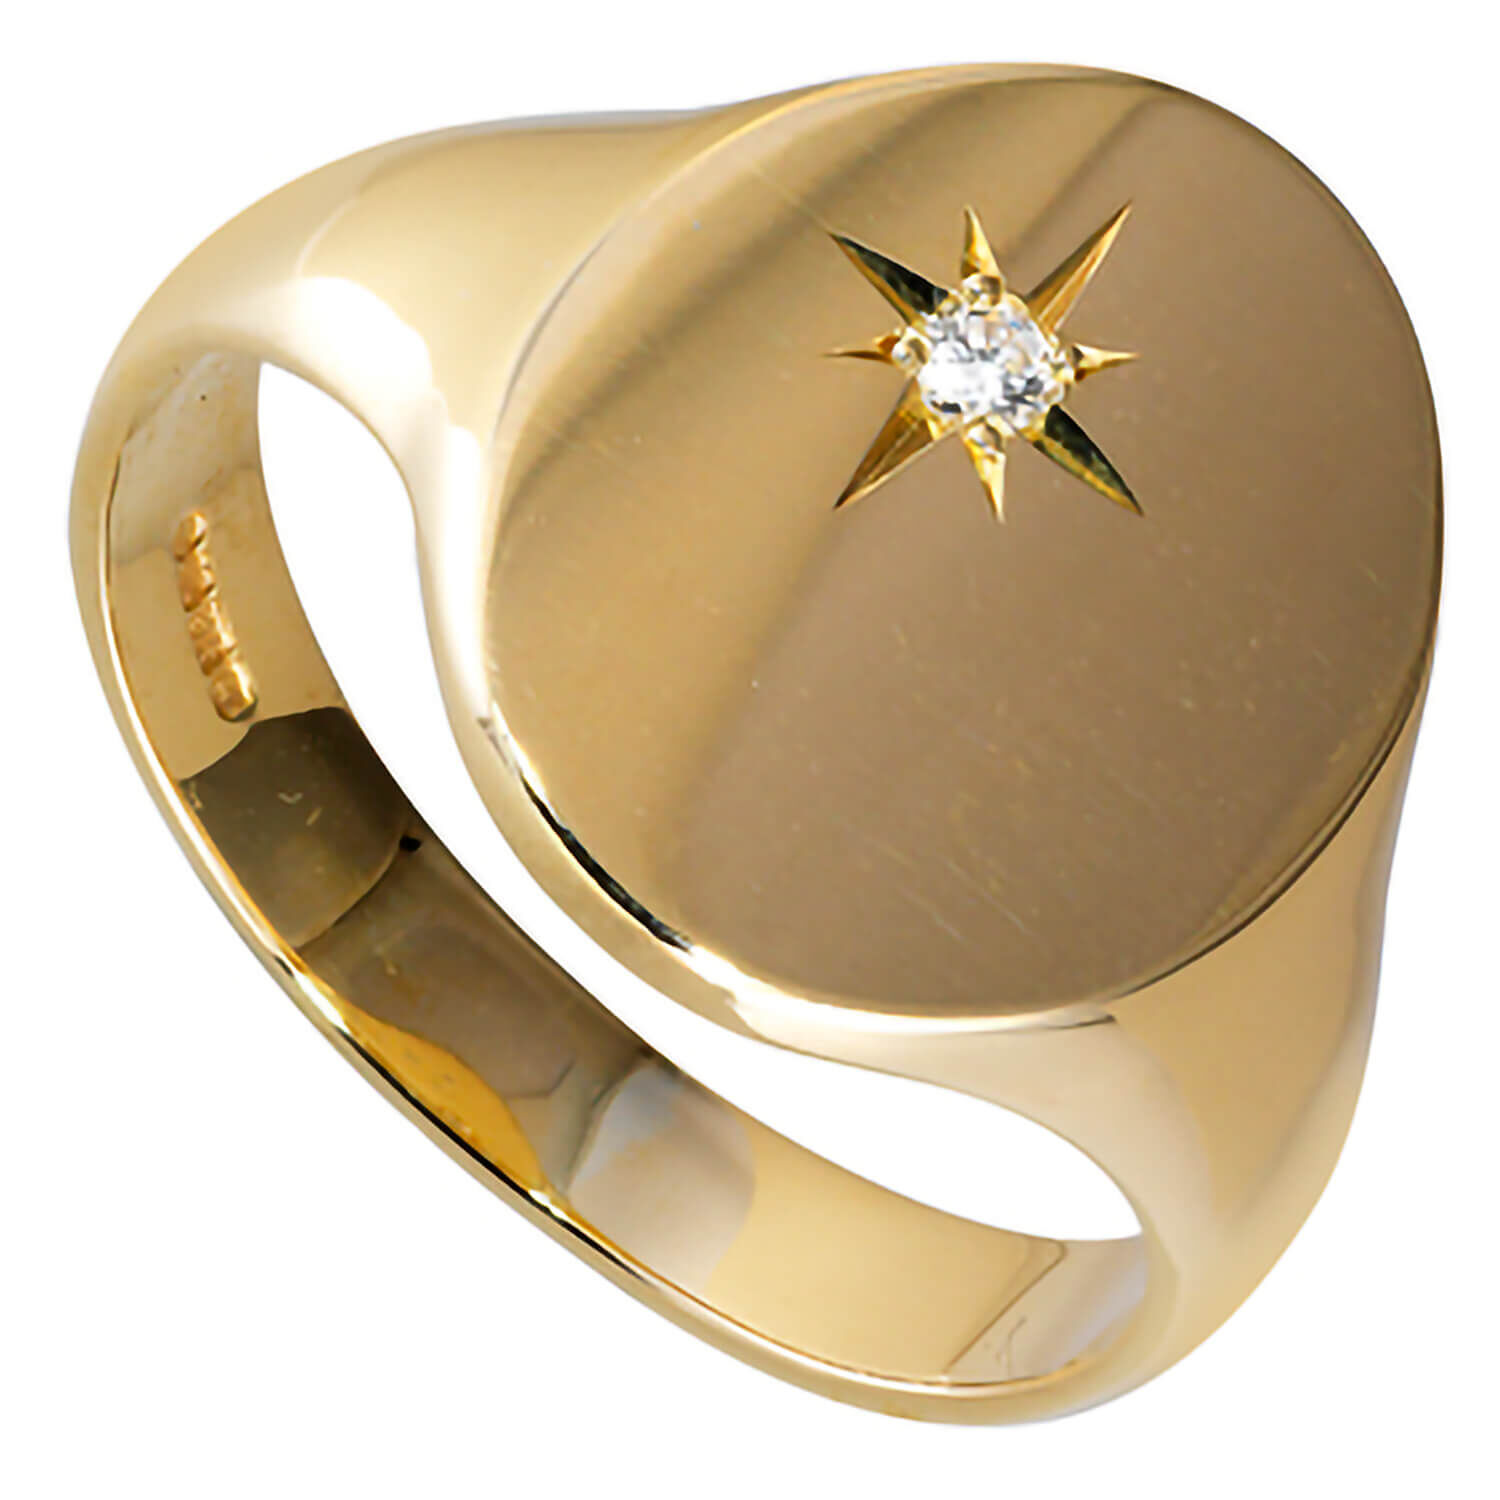 Share more than 155 24 carat gold signet ring